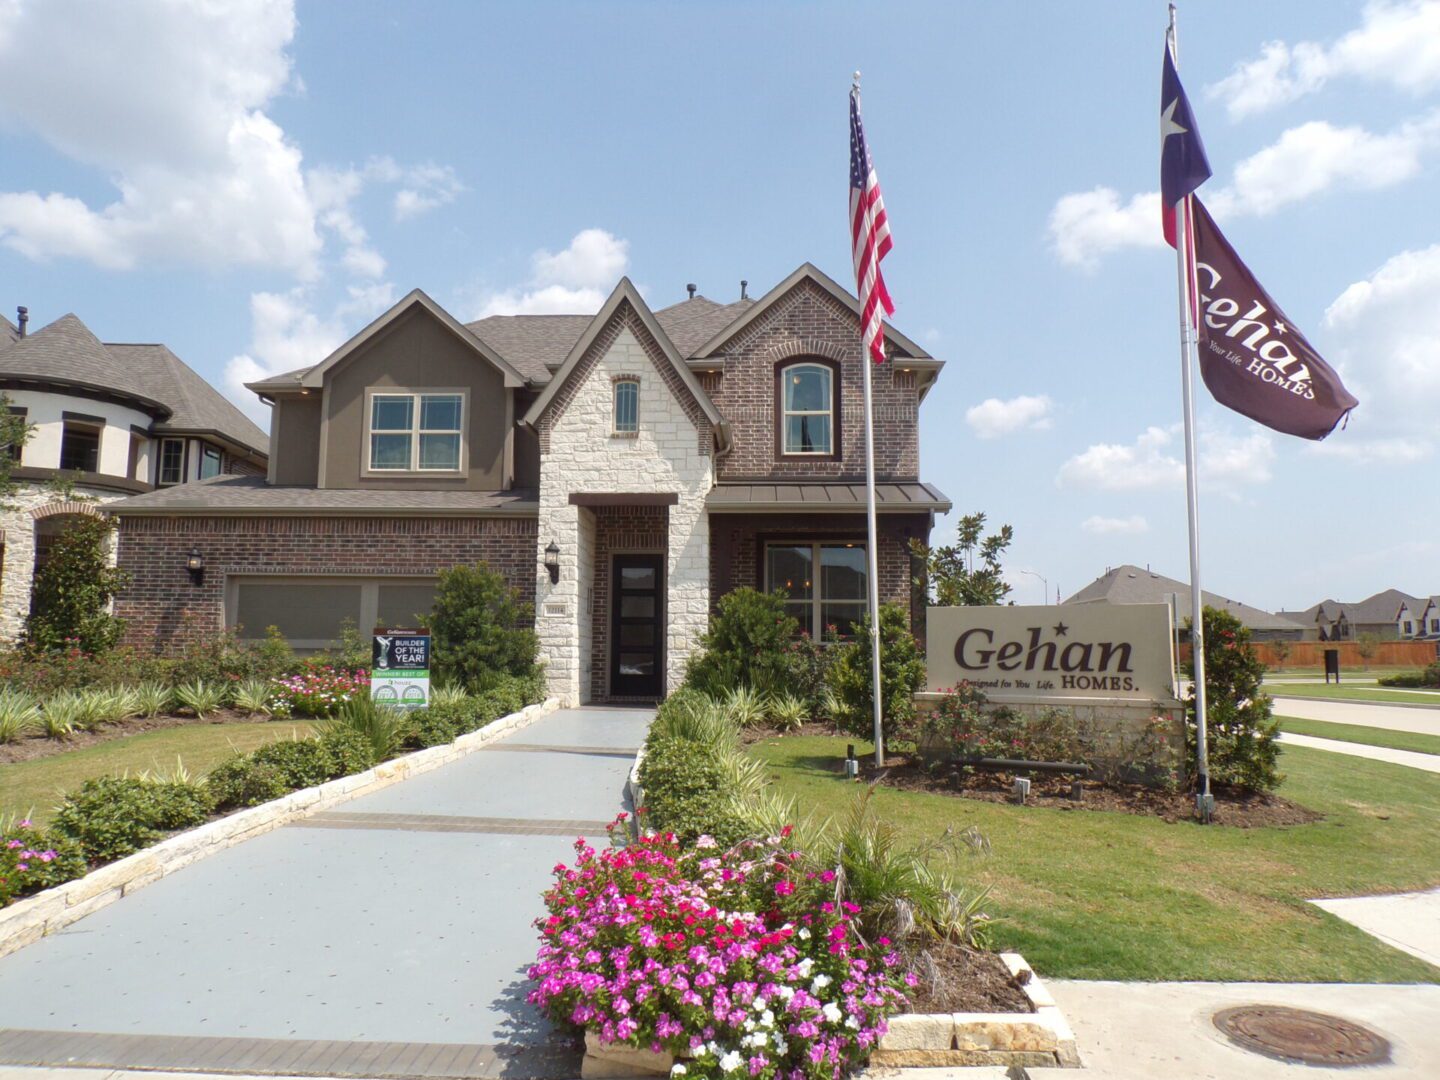 A new two-story house with a landscaped front yard, an American flag, and a Texas builders sign prominently displayed.